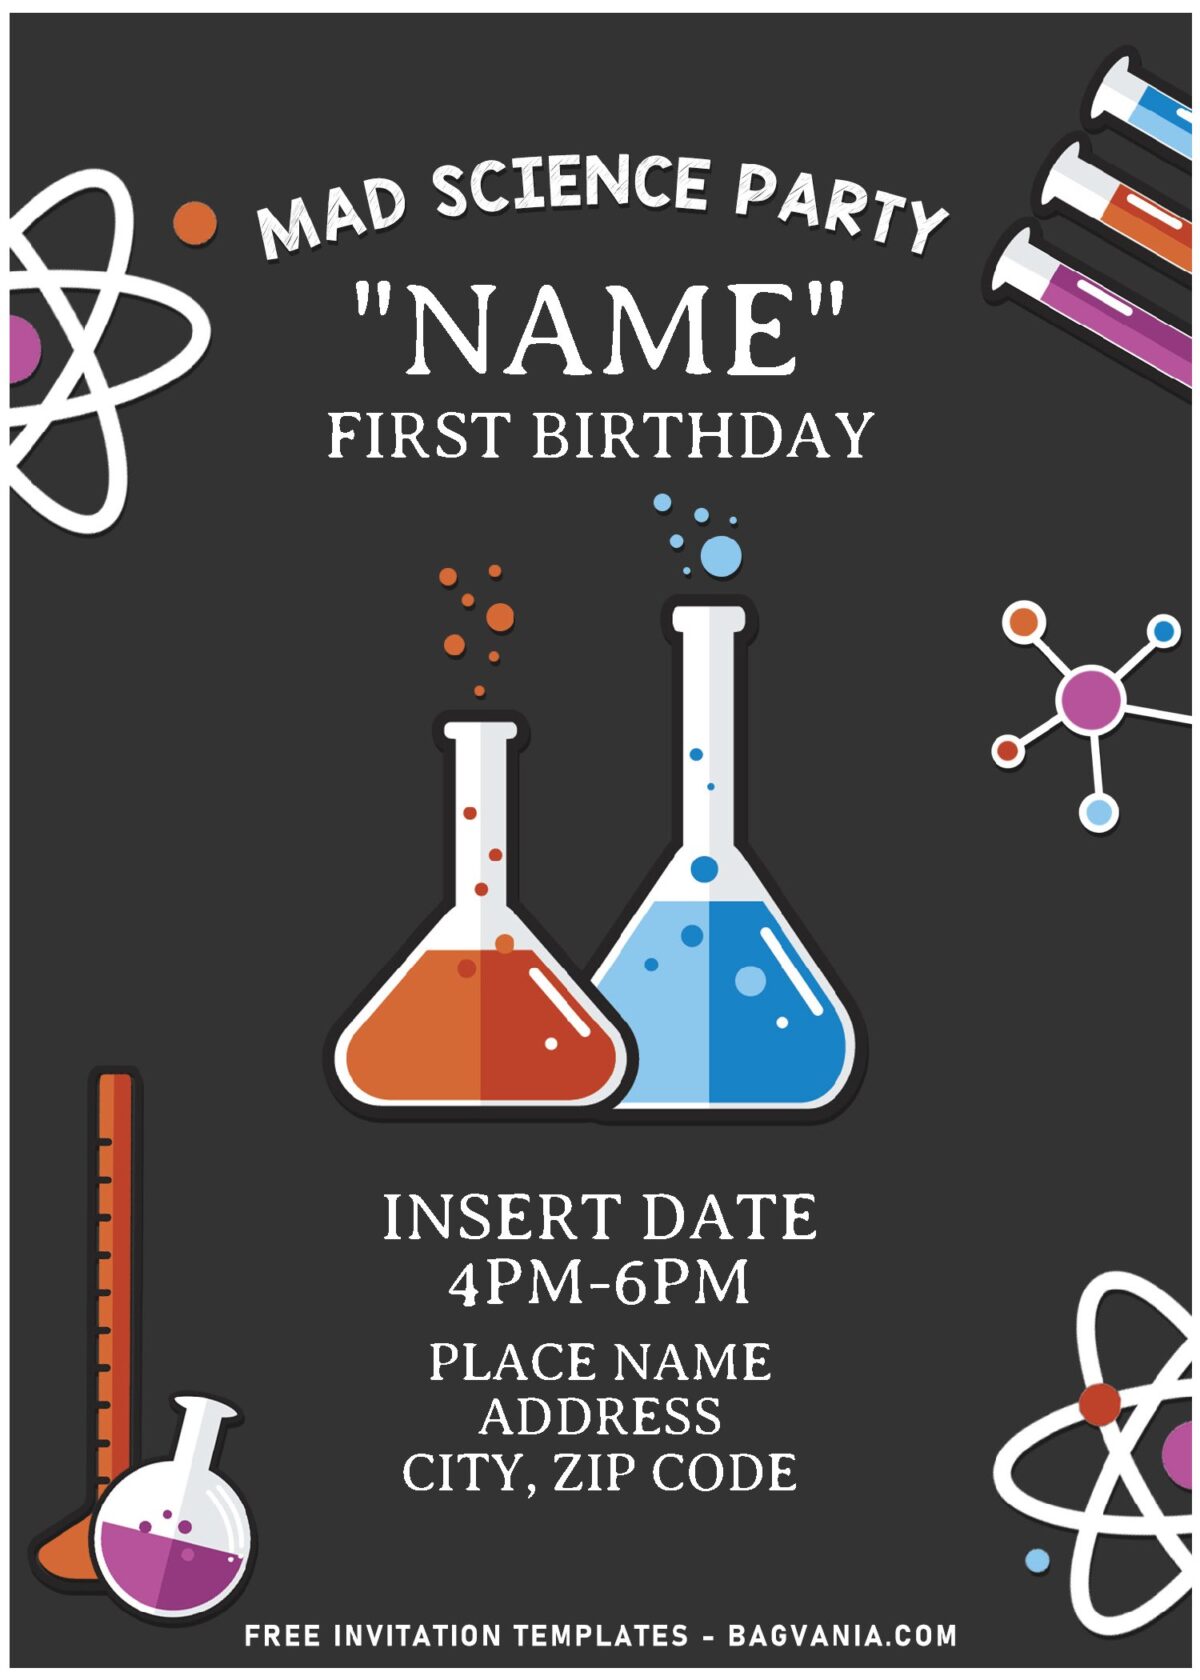 (Free Editable PDF) Fabulous Mad Scientist Birthday Party Invitation Templates with chalkboard background